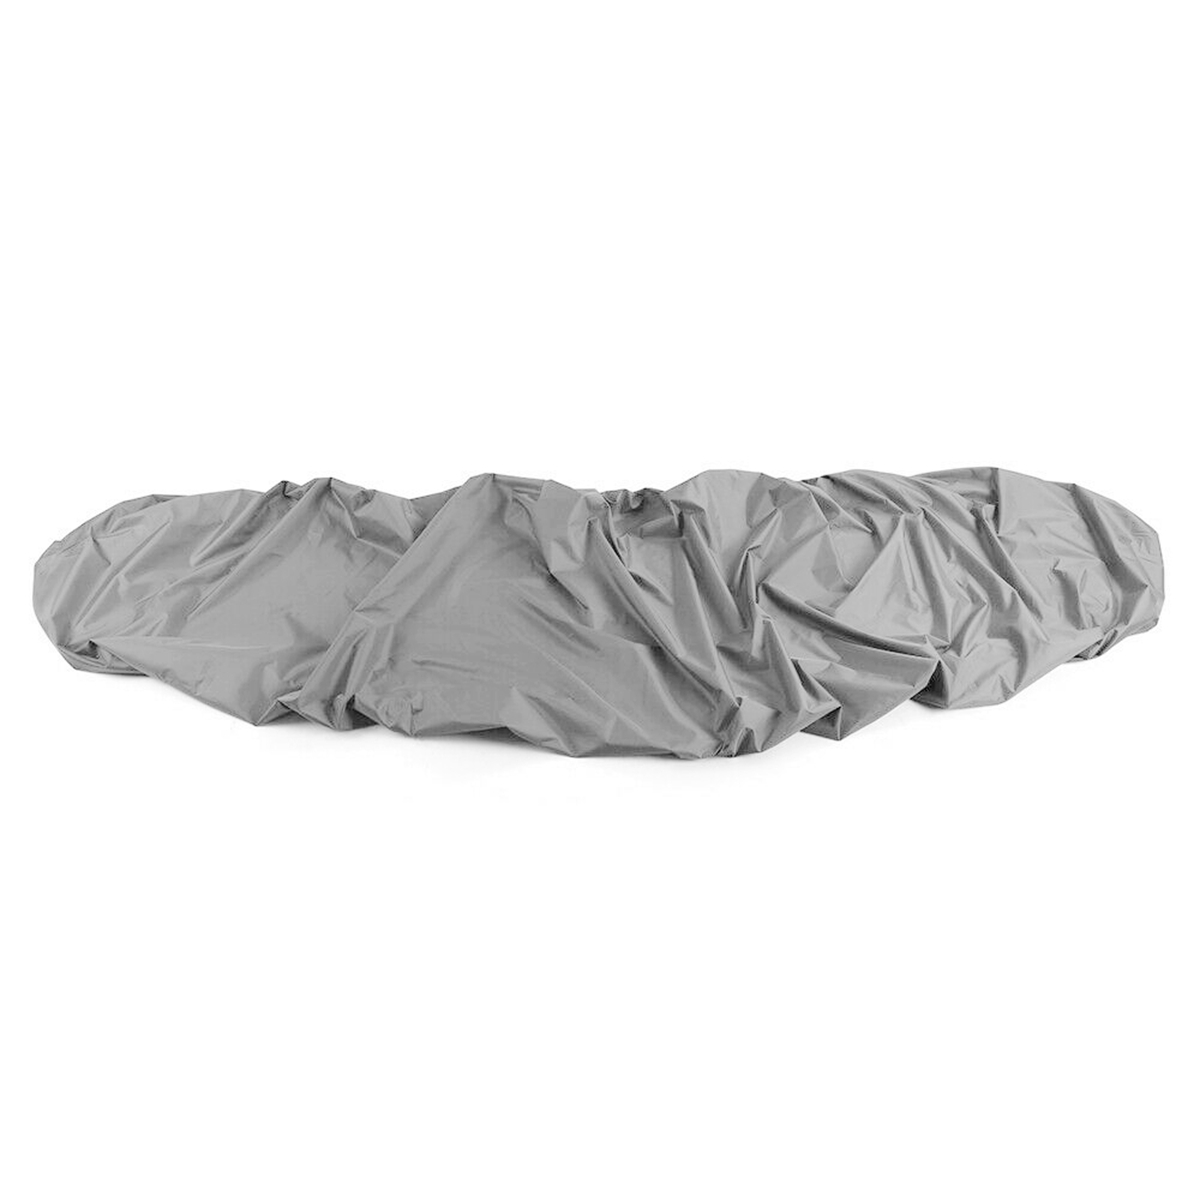 Kayak Cover with Adjustable Bottom Straps UV Resistant Dust Shield Silver for Hydra Creek